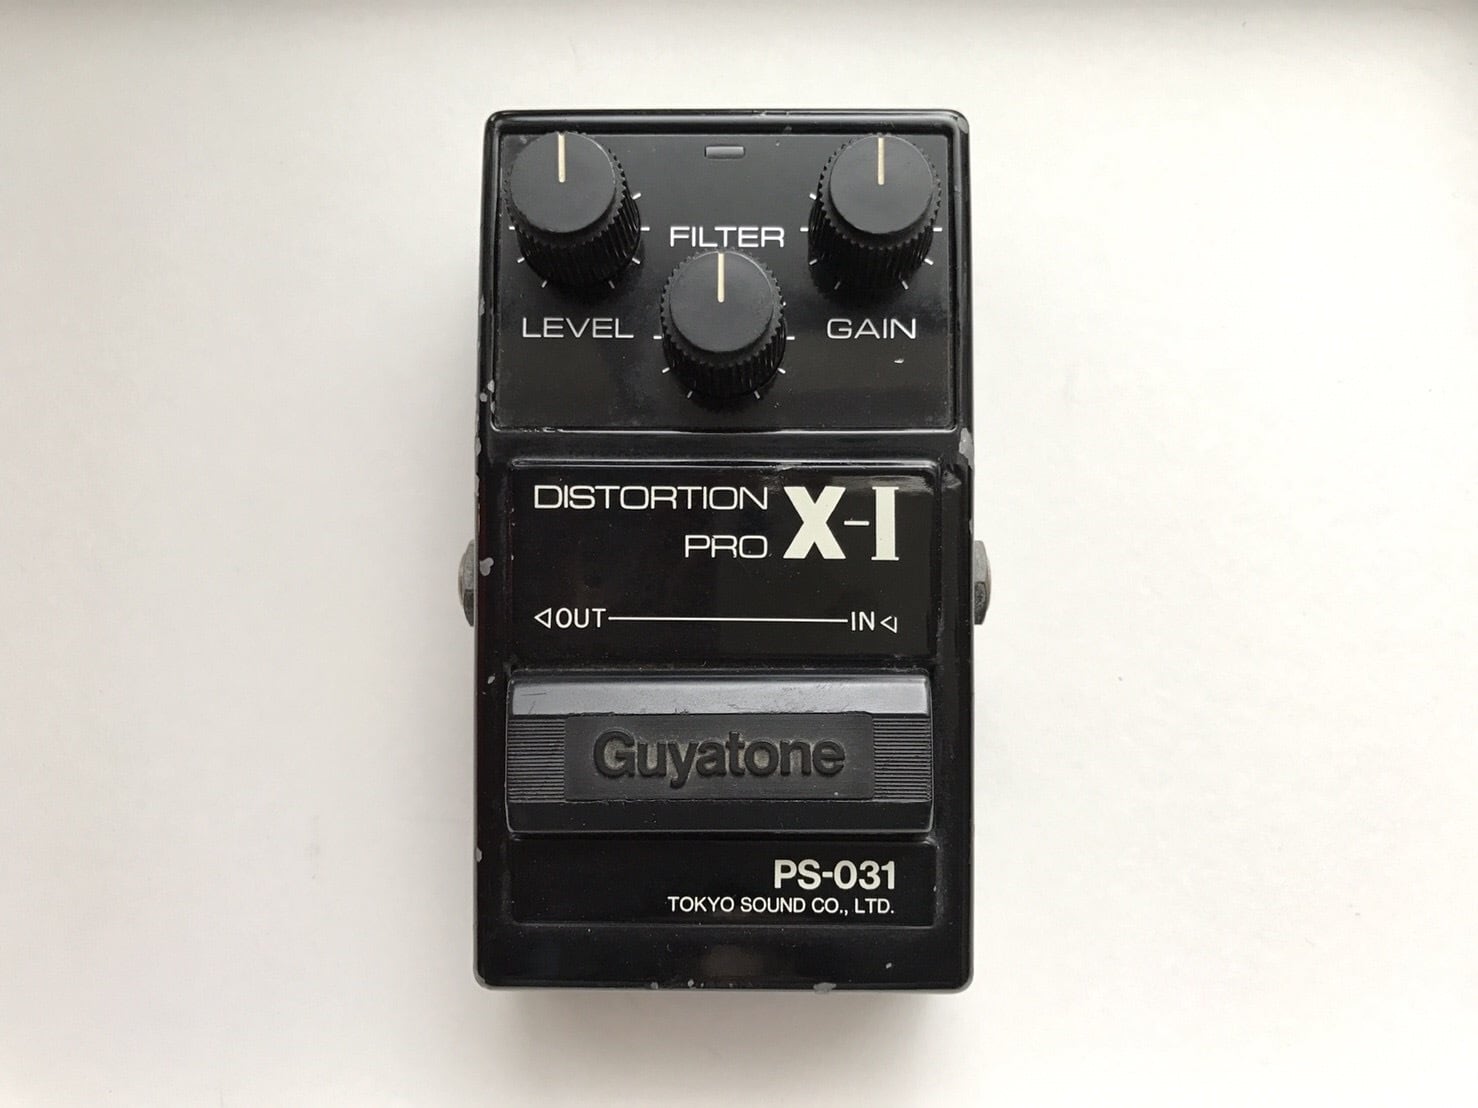 Guyatone PS-301 Distortion Pro X-1 | YOUSAYSOUNDS powered by BASE